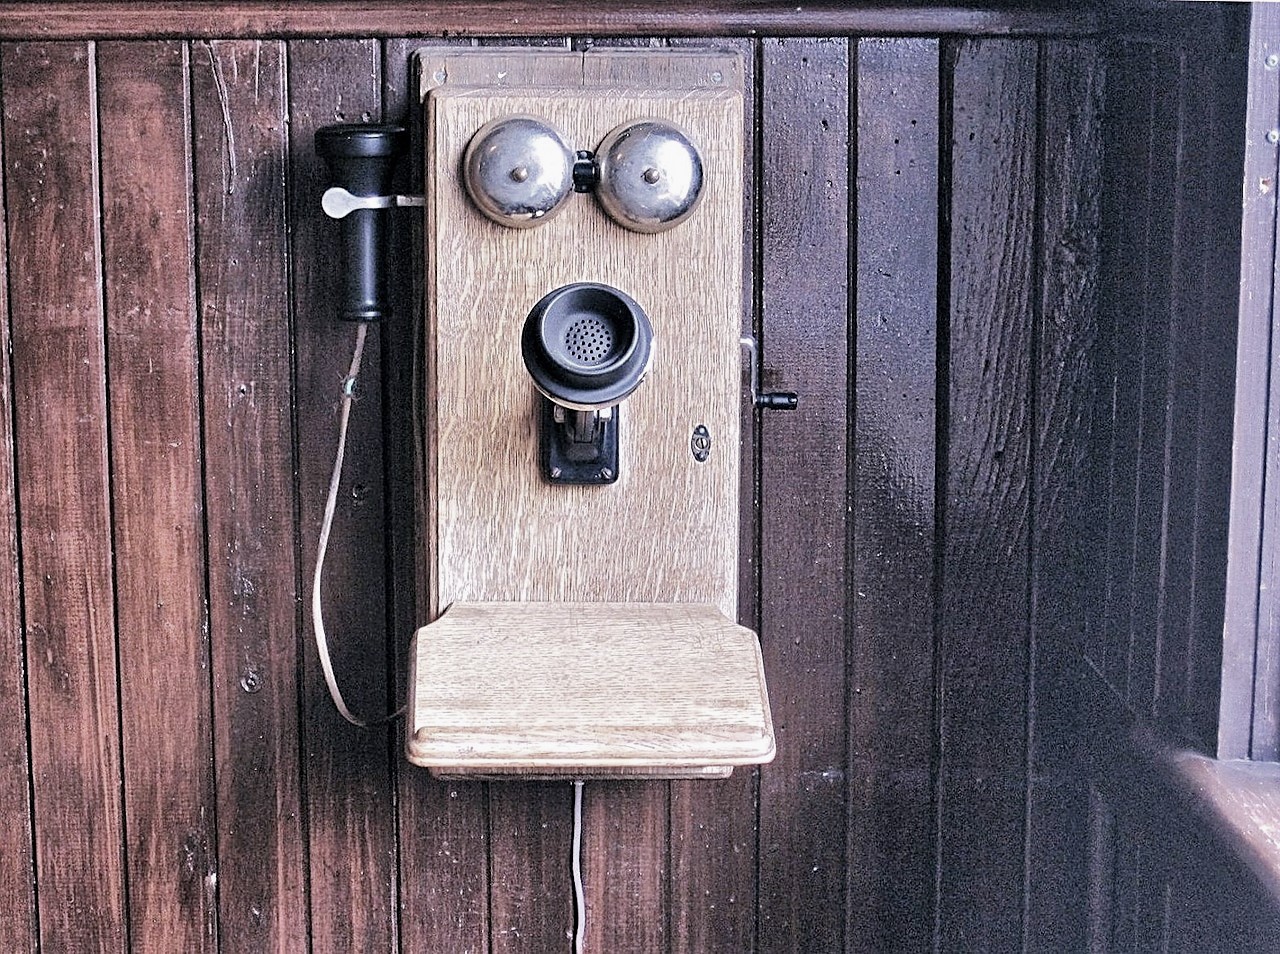 old-wall-crank-telephone-535514_1280